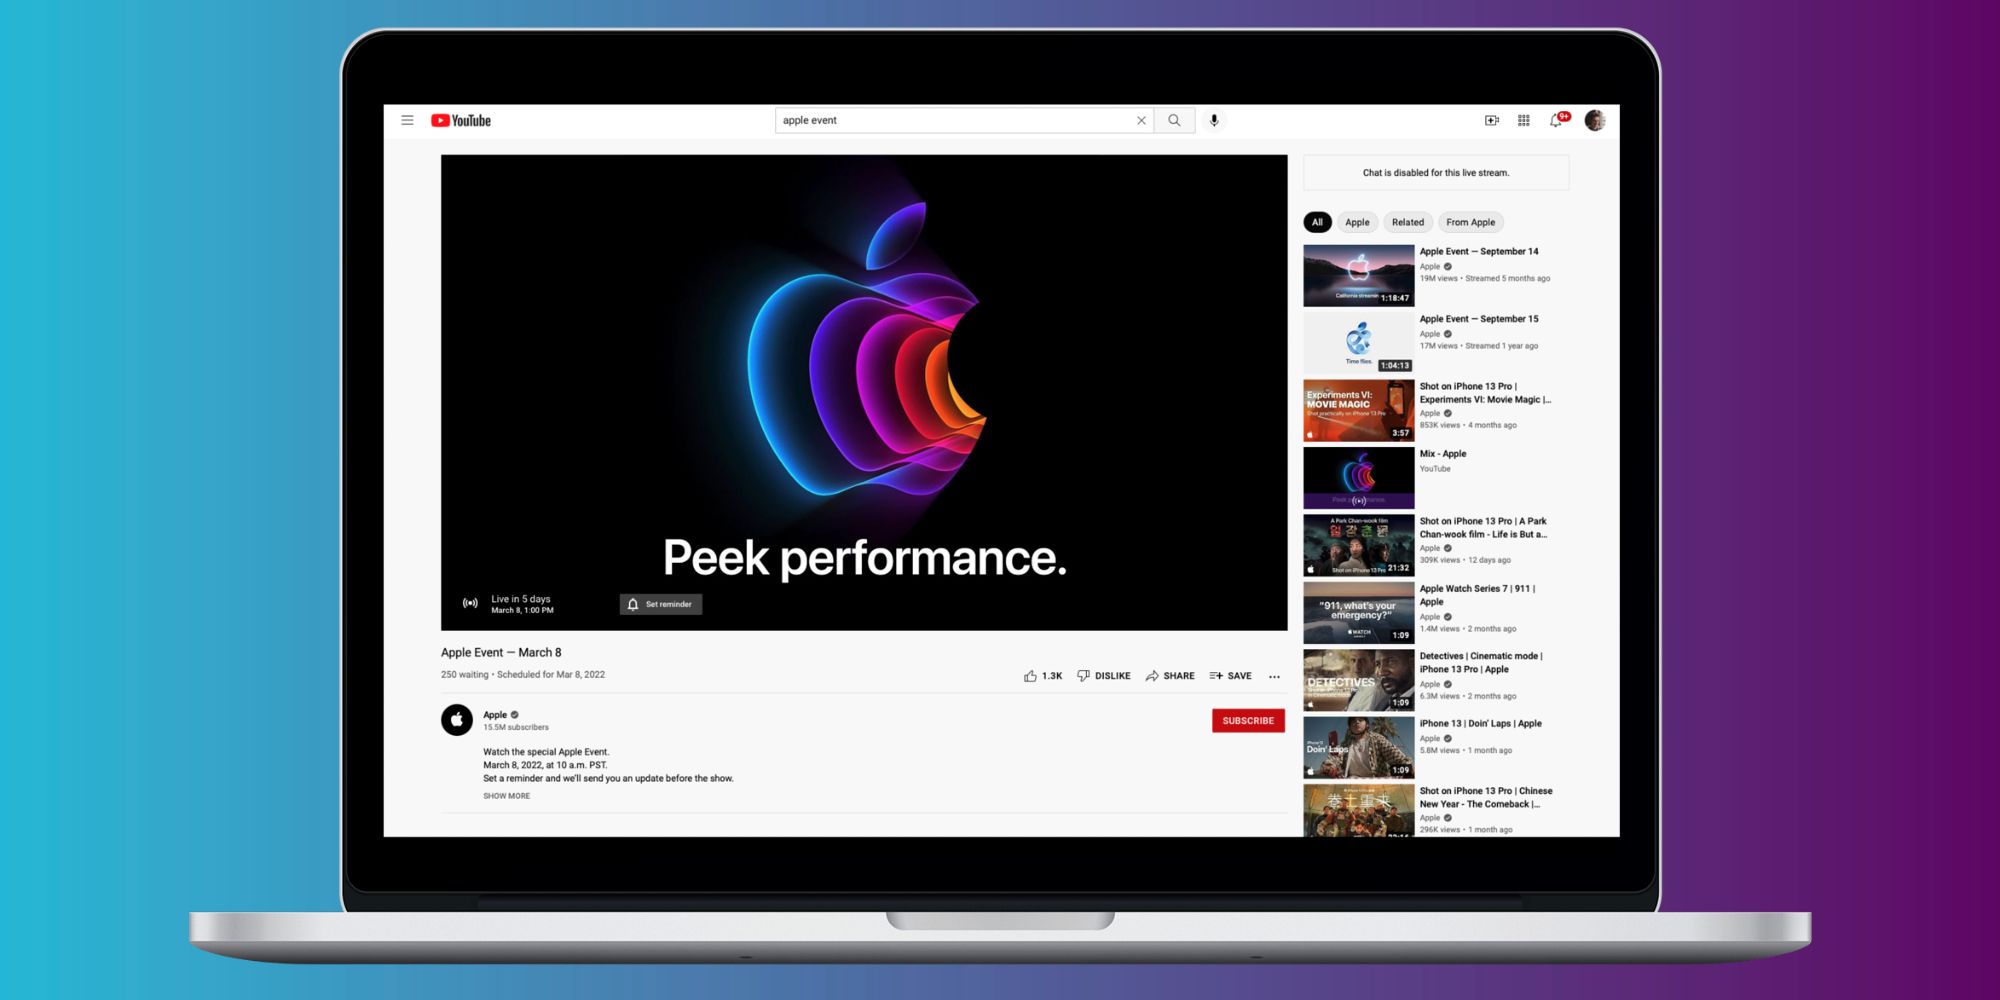 How To Watch Apple's 'Peek Performance' Event On March 8